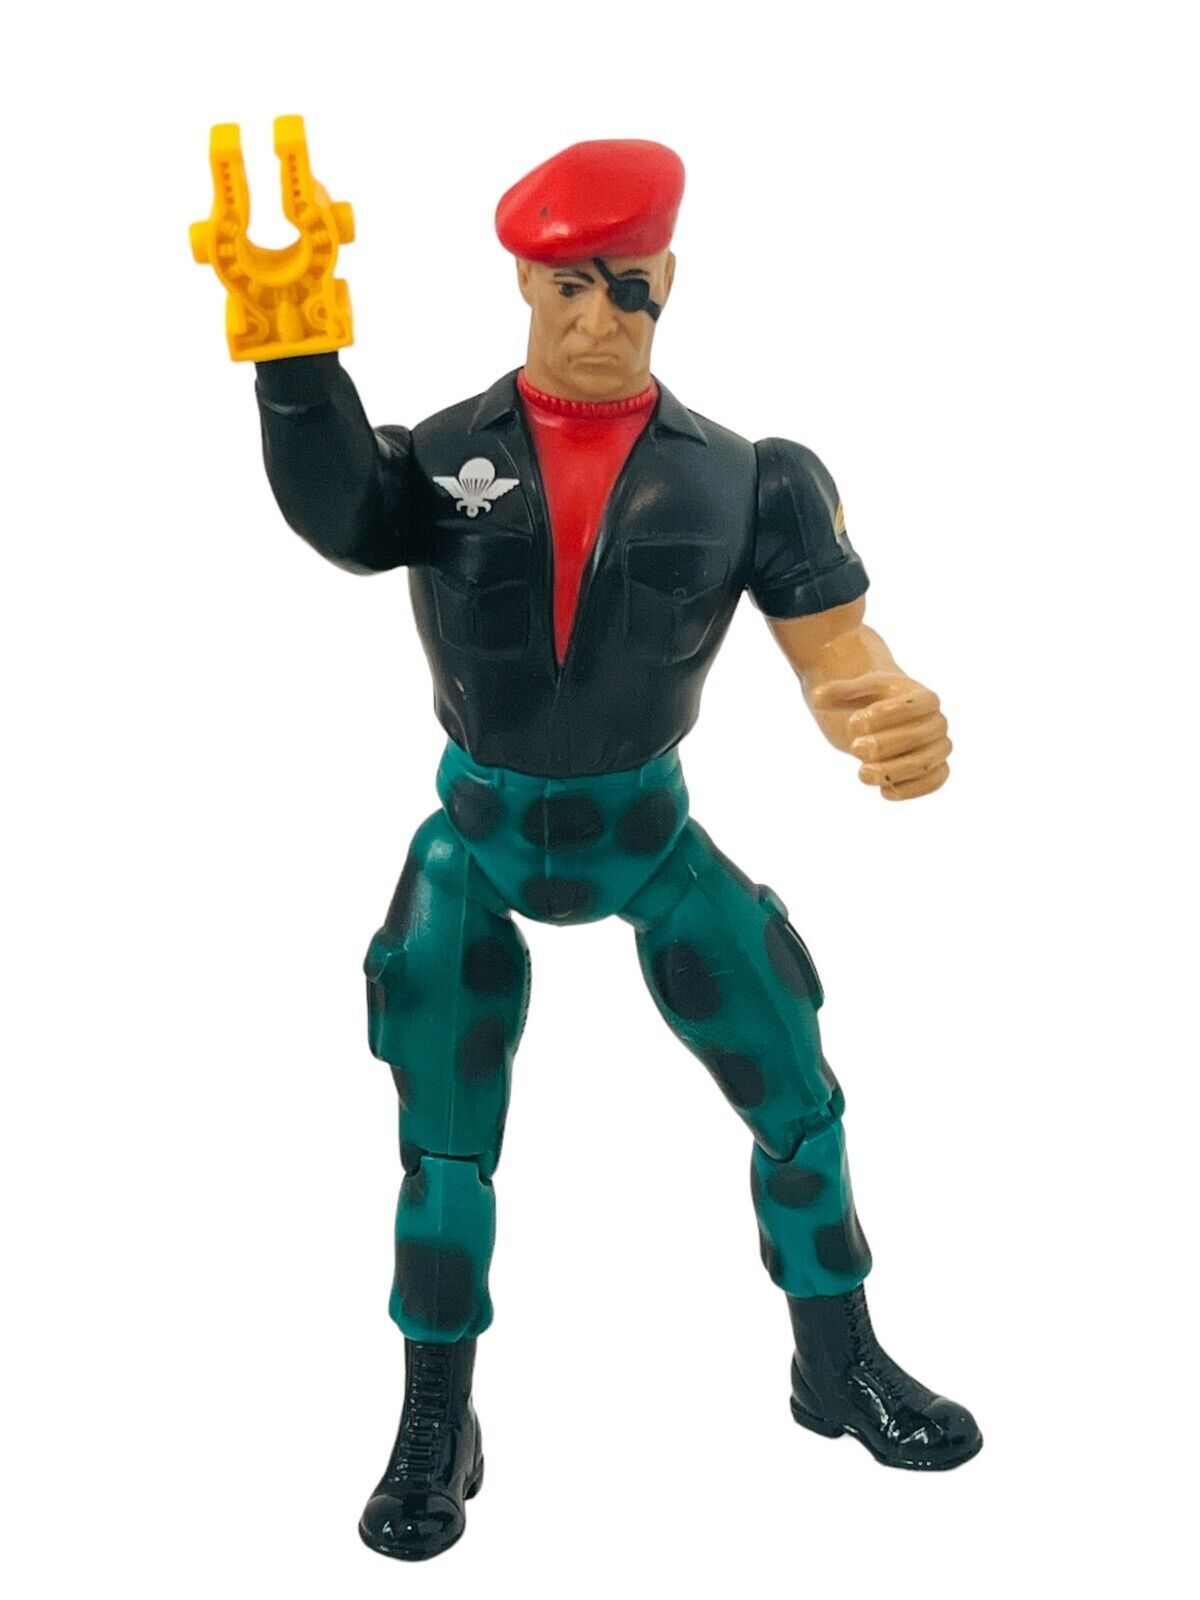 Rambo Freedom Force vtg Figure Toy 1986 Coleco Sylvester Stallone Gripper Claw - $39.55